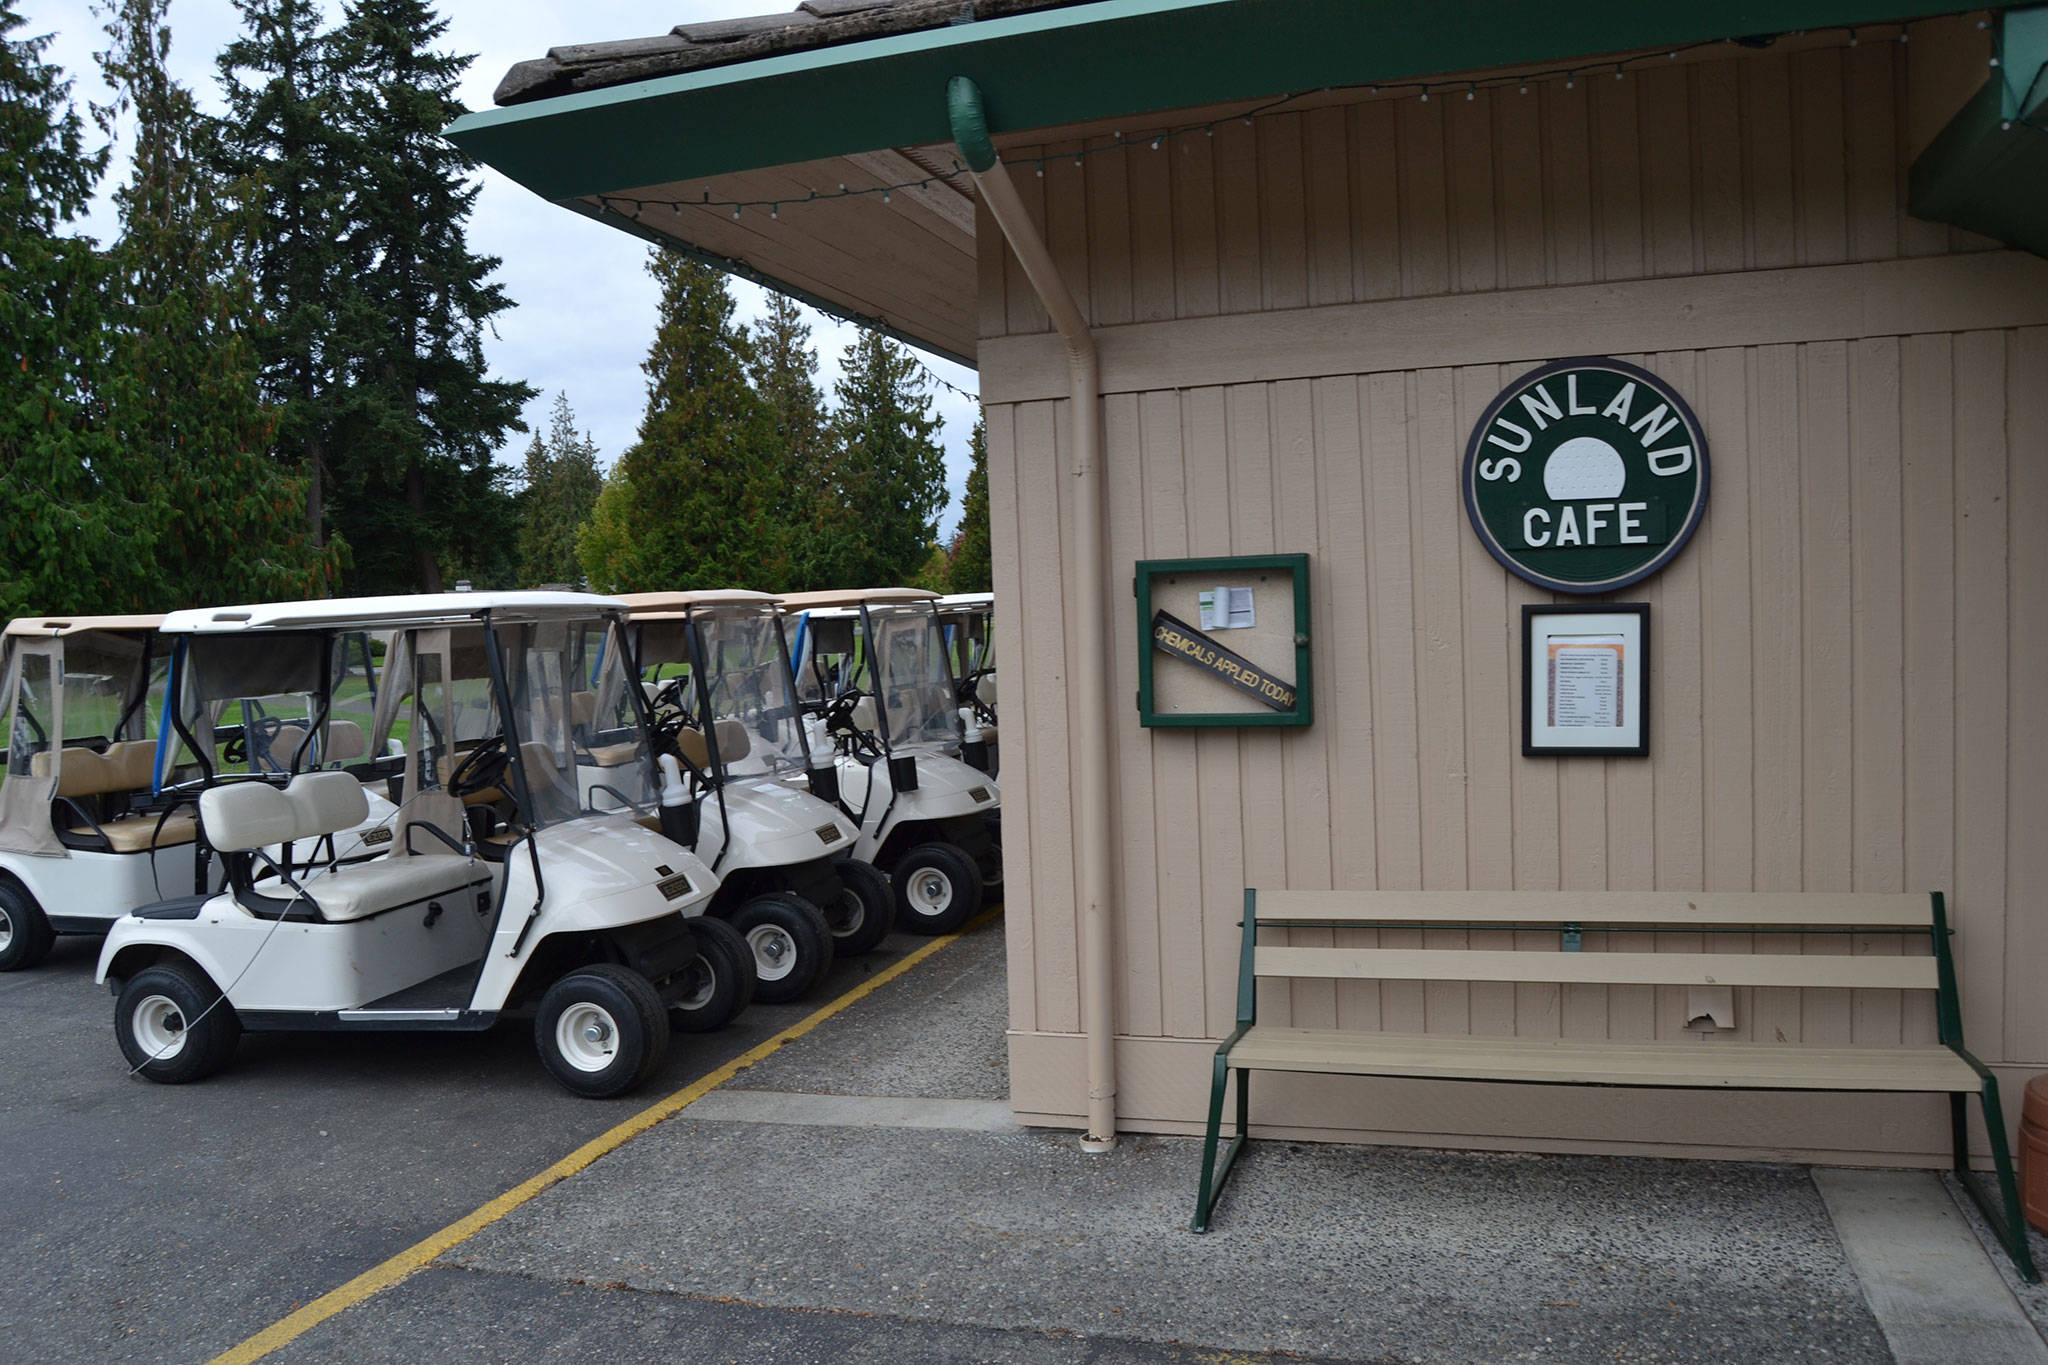 One of the biggest deficits for the Sunland Golf & Country Club has been its cafe, leaders say, so its hours on Tuesdays and Thursdays were cut along with its catering service starting Oct. 1. Sequim Gazette photo by Matthew Nash